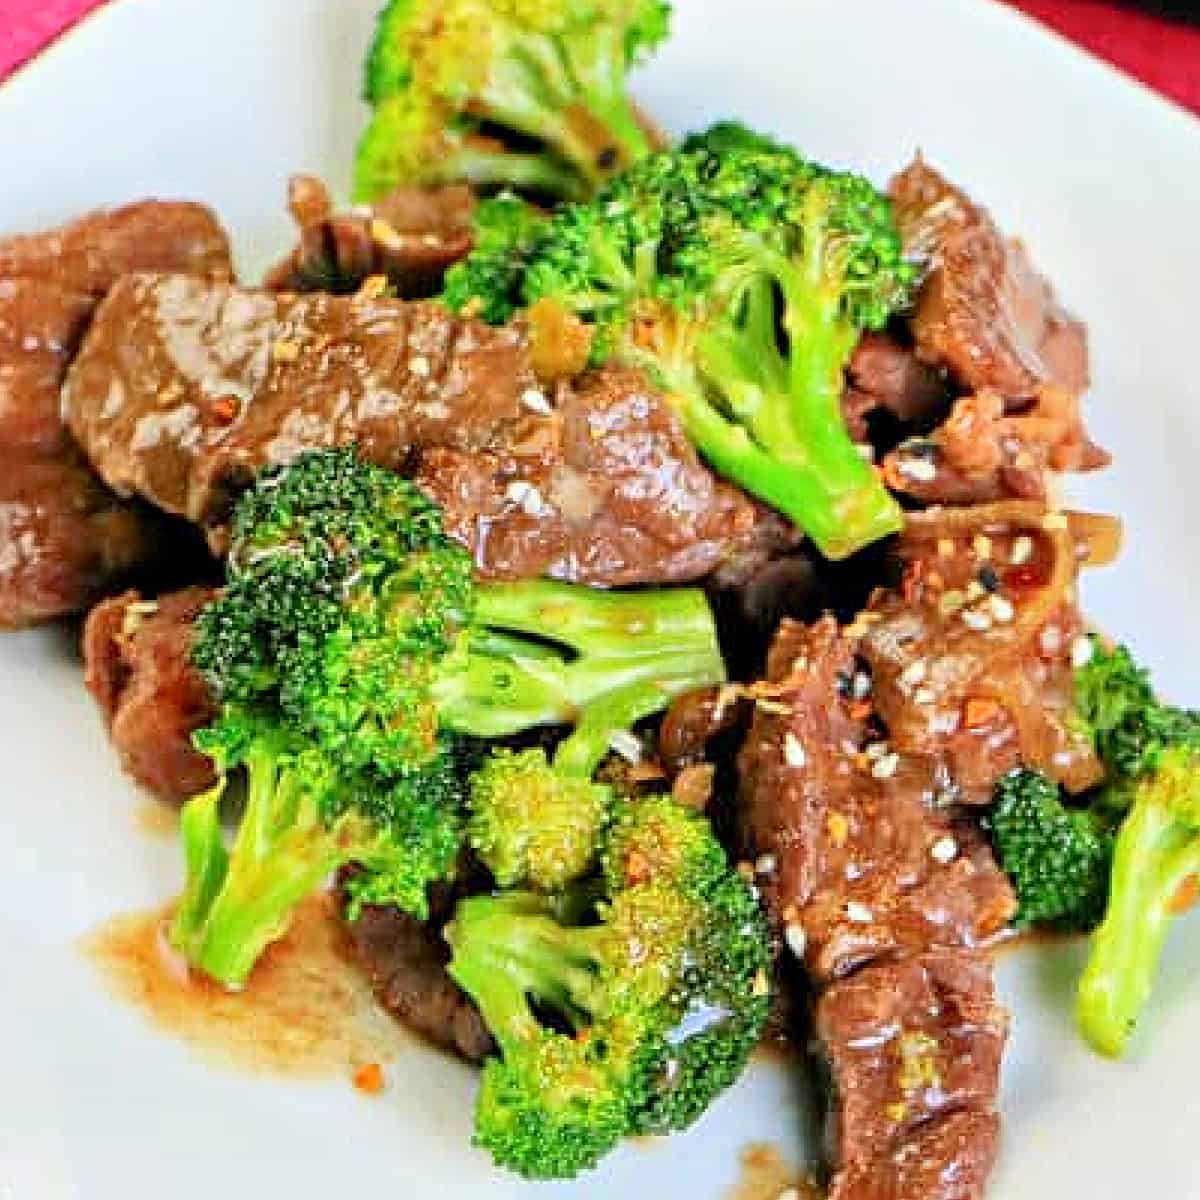 Slow-Cooker-Low-Carb-Broccoli-Beef-5-600x900